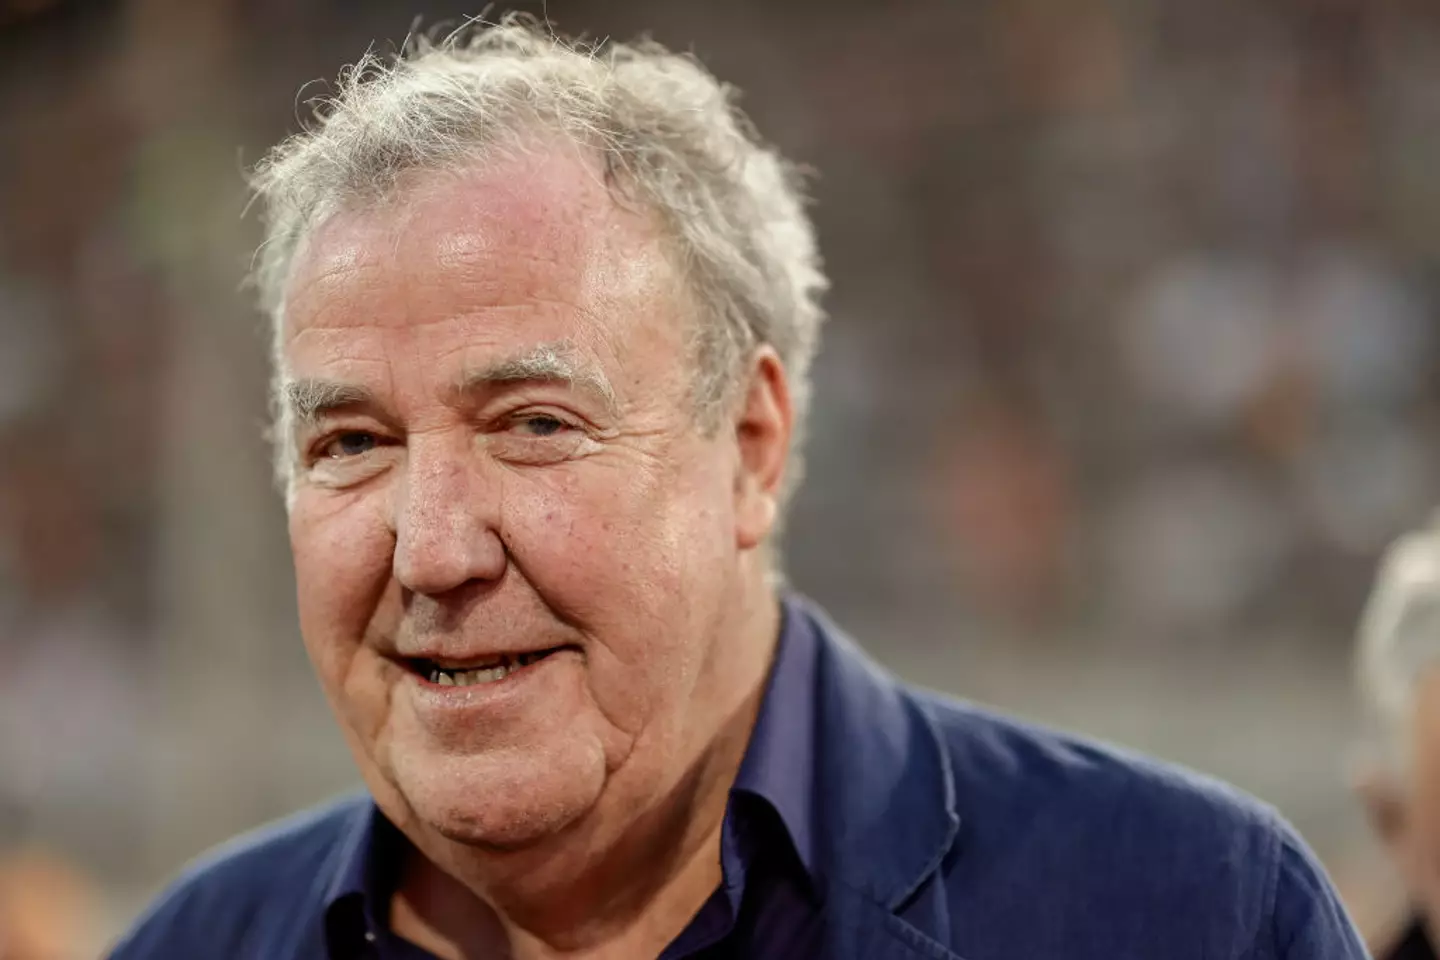 Jeremy Clarkson has expanded his business ventures (Qian Jun/MB Media/Getty Images)